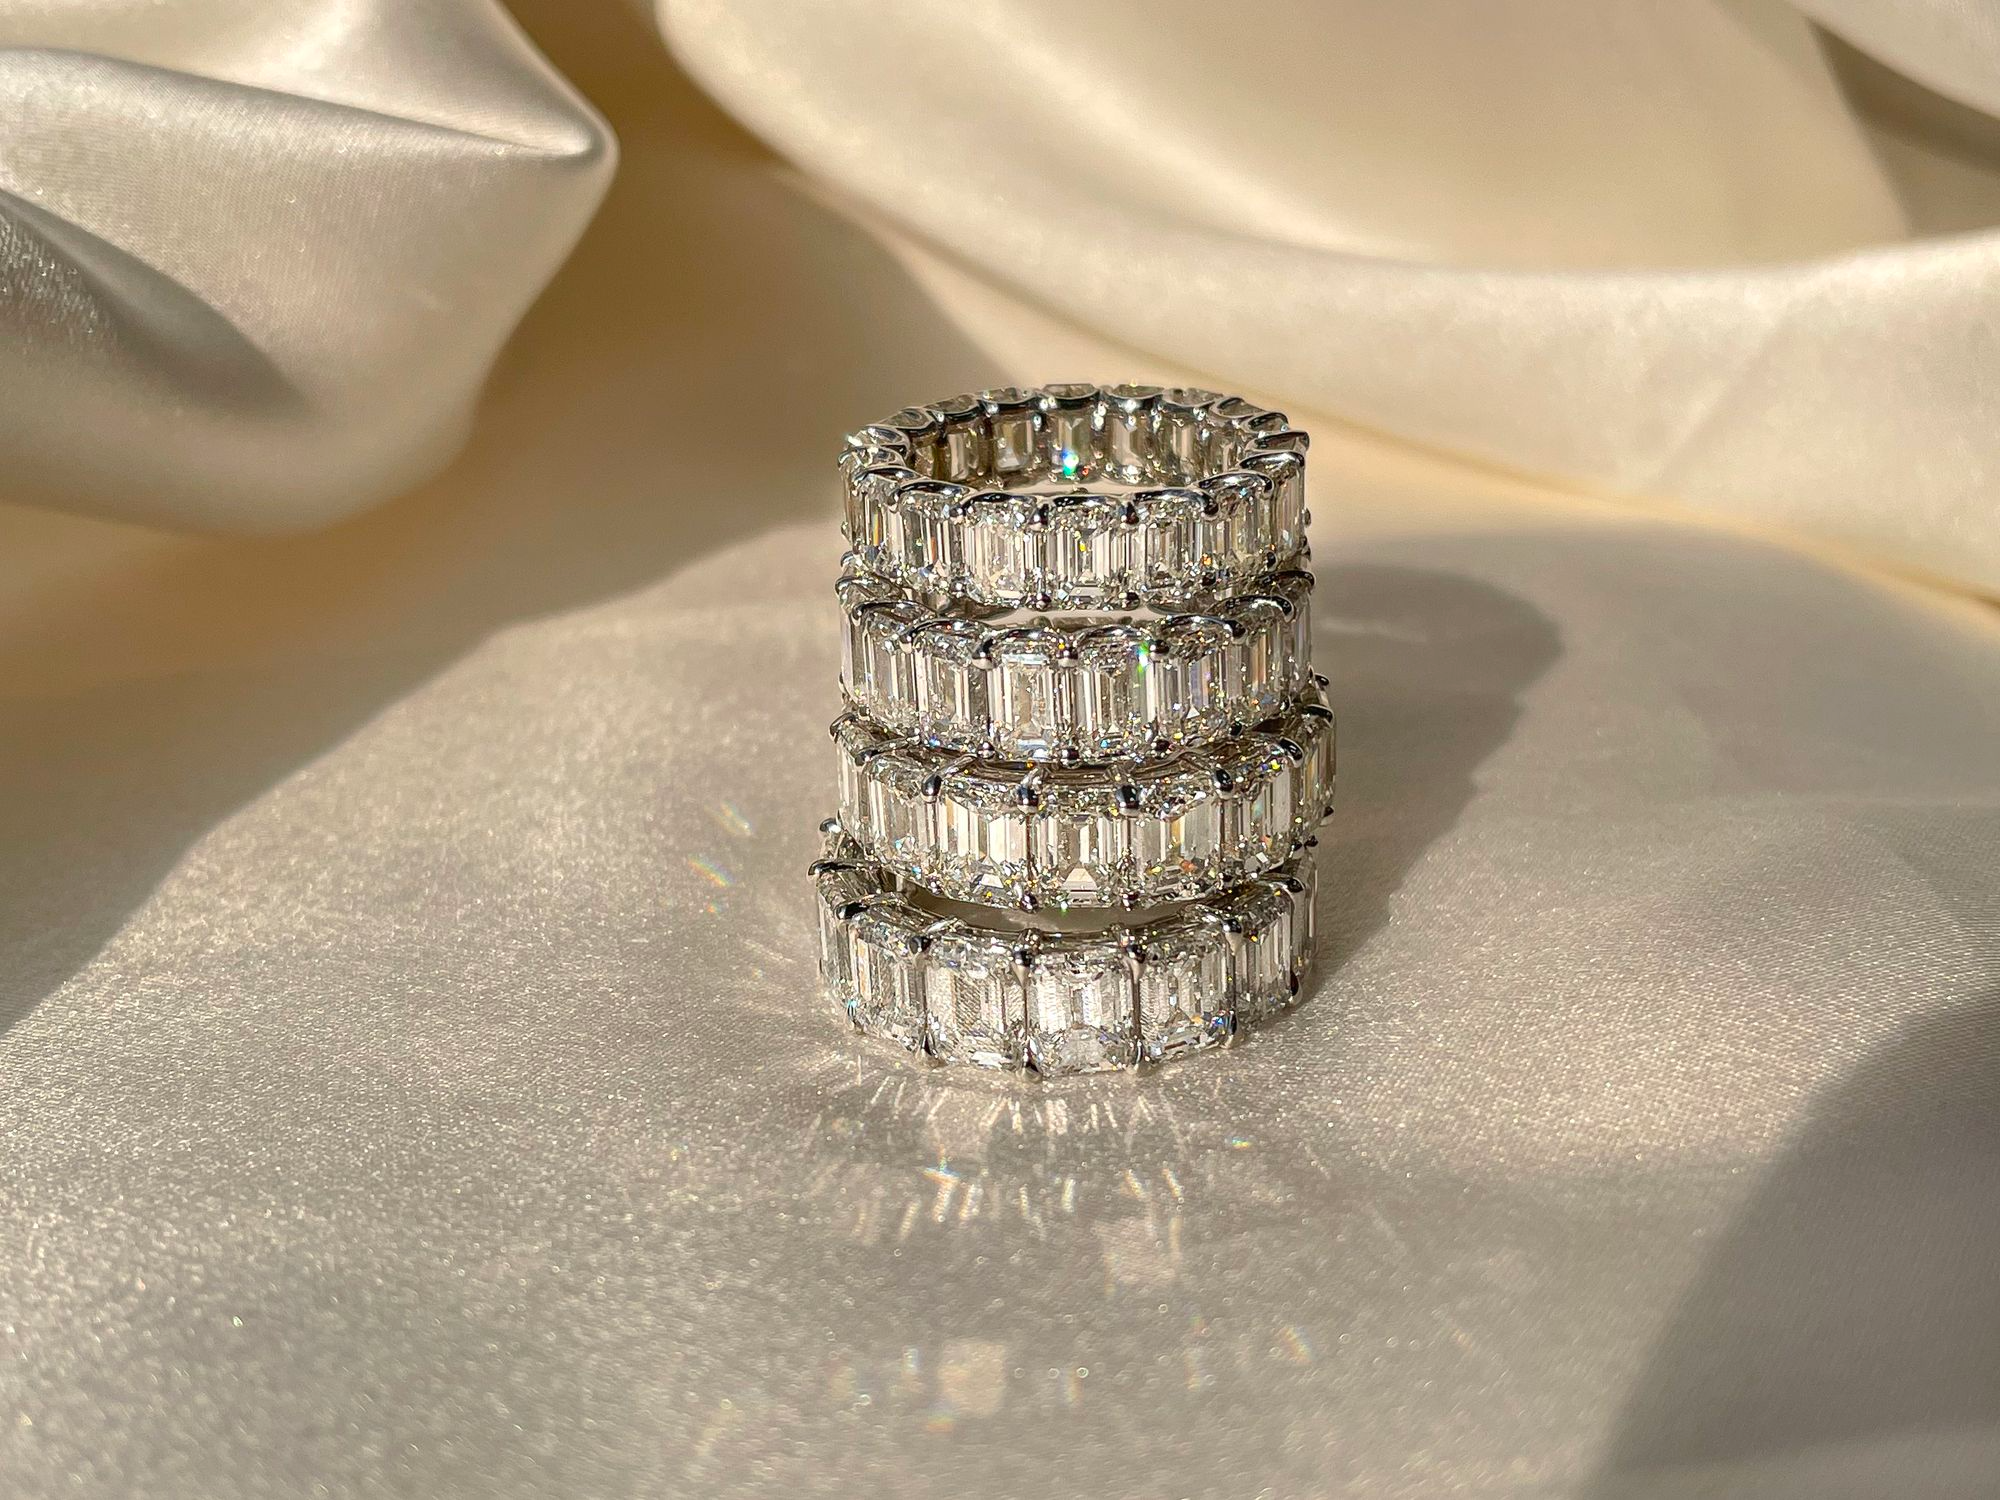 A Timeless Gesture: Gifting Diamond Eternity Rings for Valentine’s Day